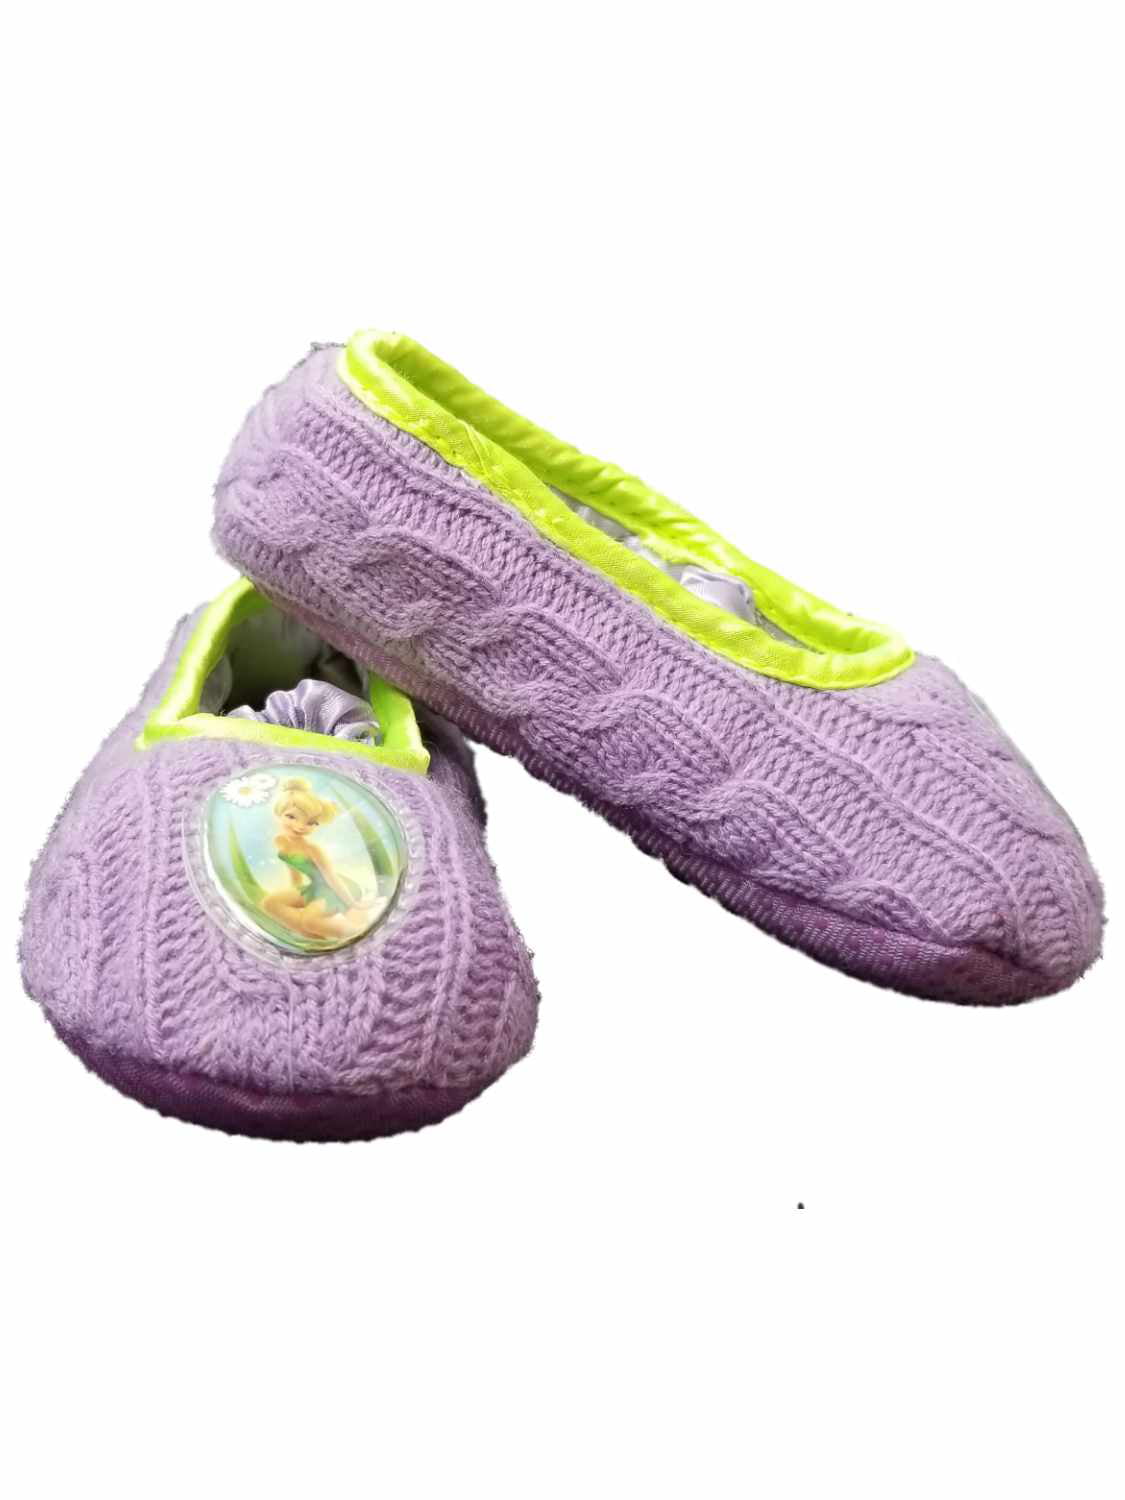 Toddler Girls Purple Tinkerbell Slippers House Shoes Small 5-6